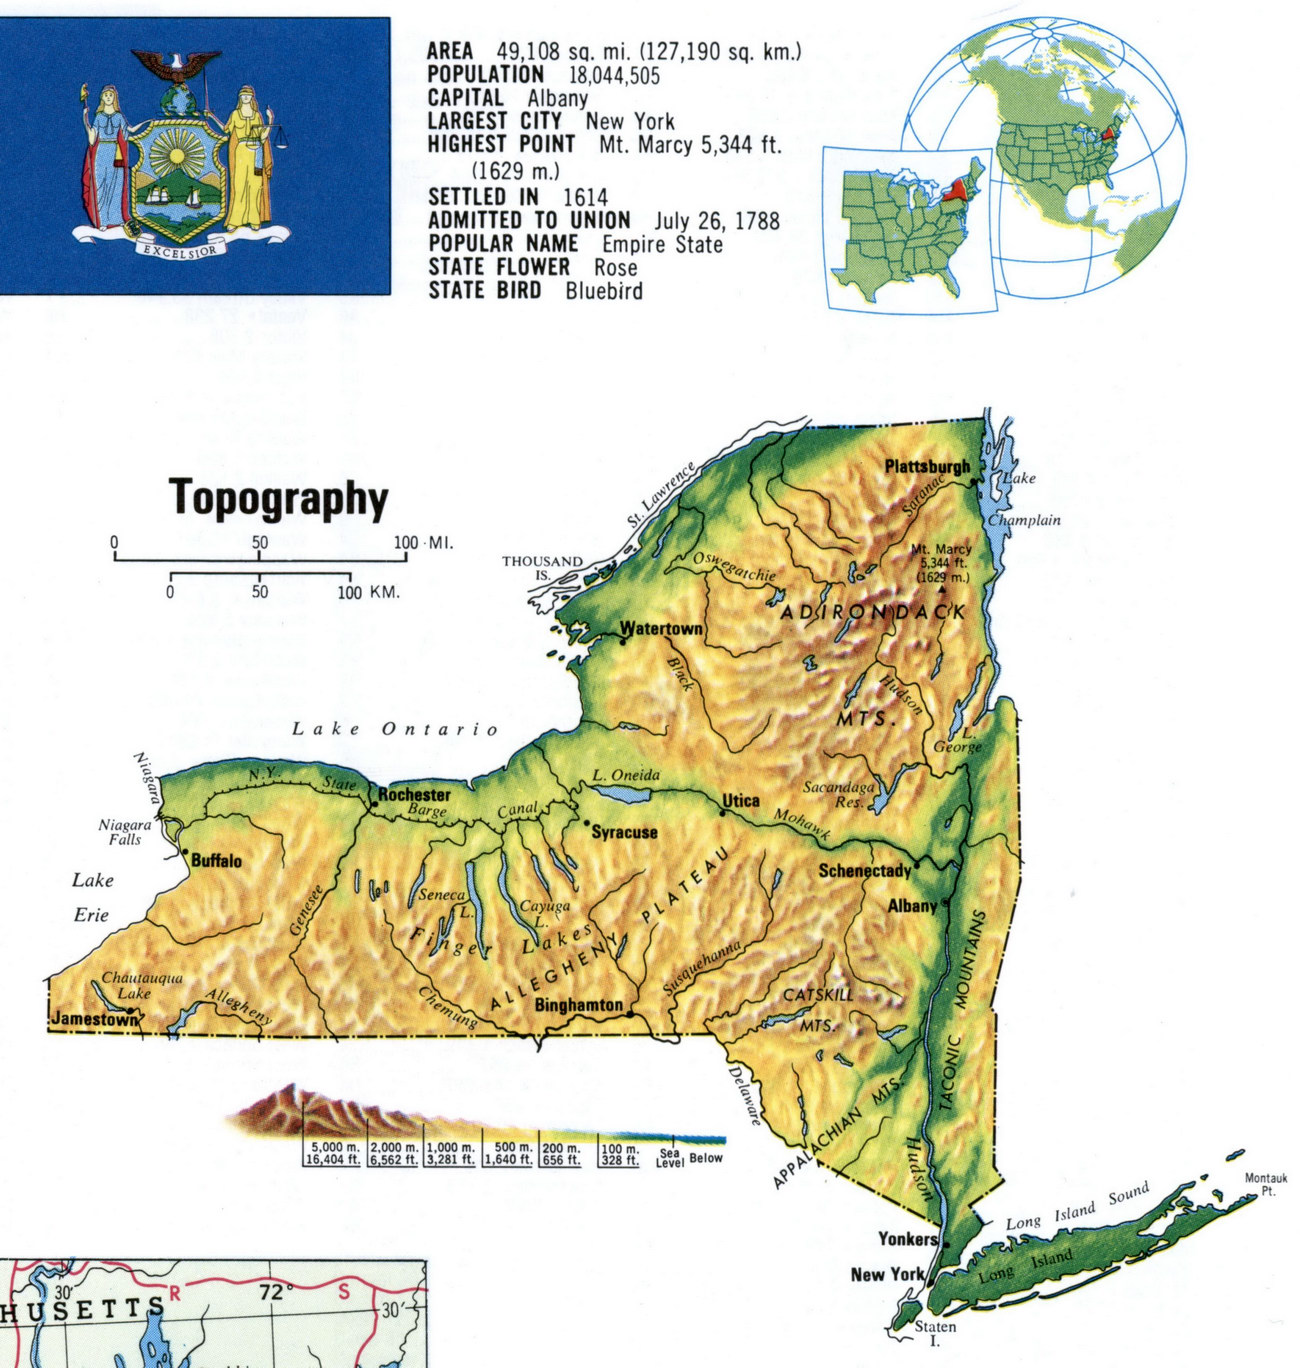 Landscape map of New York state